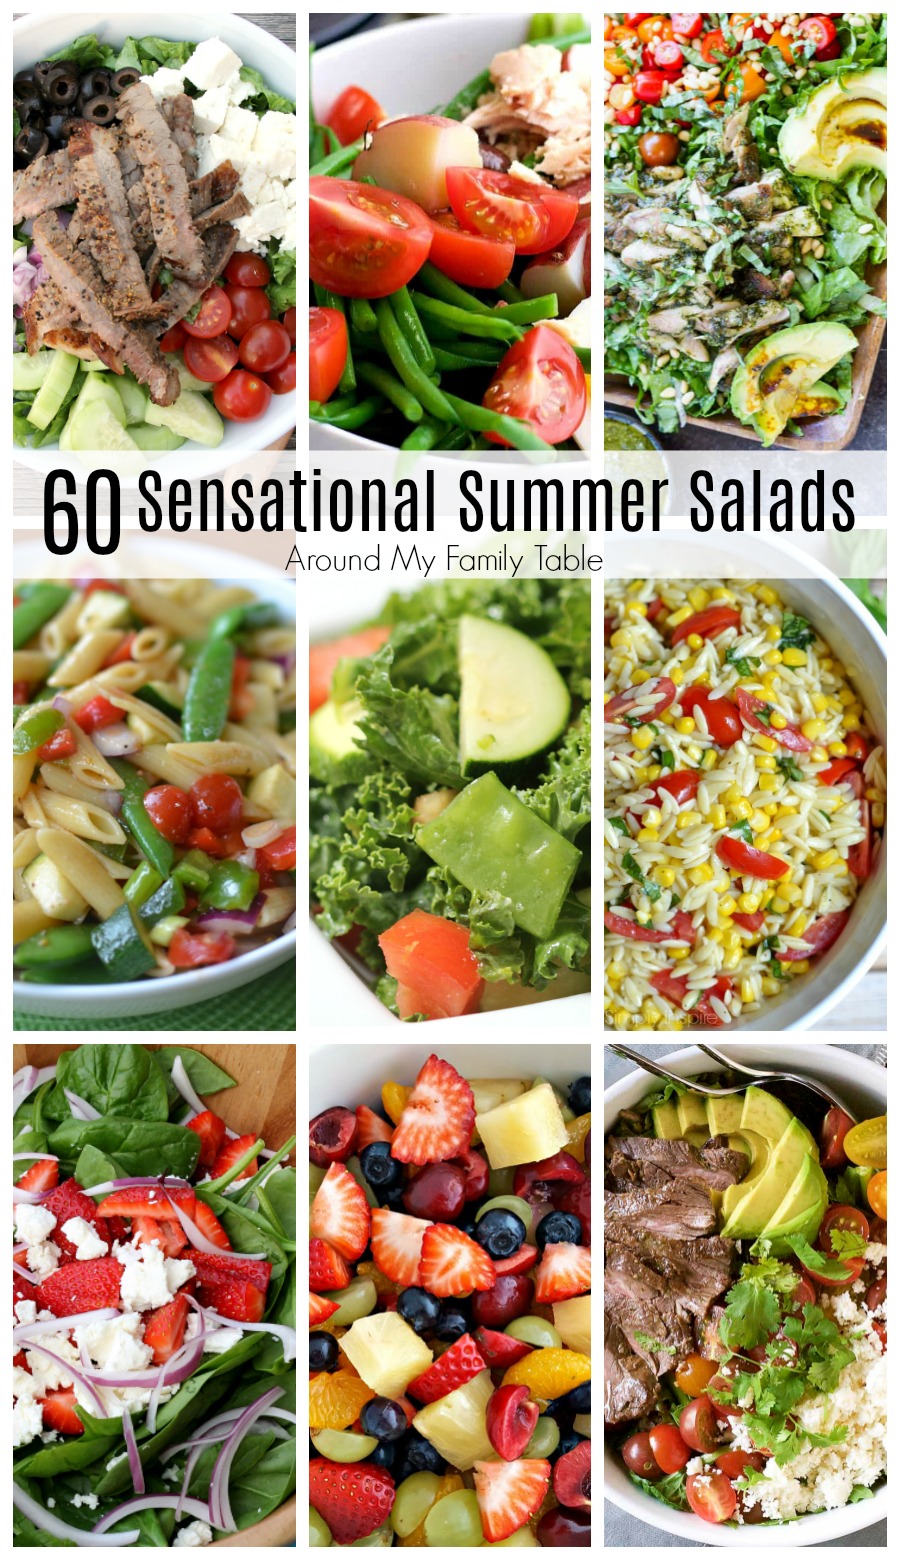 These 60 Sensational Summer Salads are perfect for those hot summer days when you need an easy side dish or a light meal.